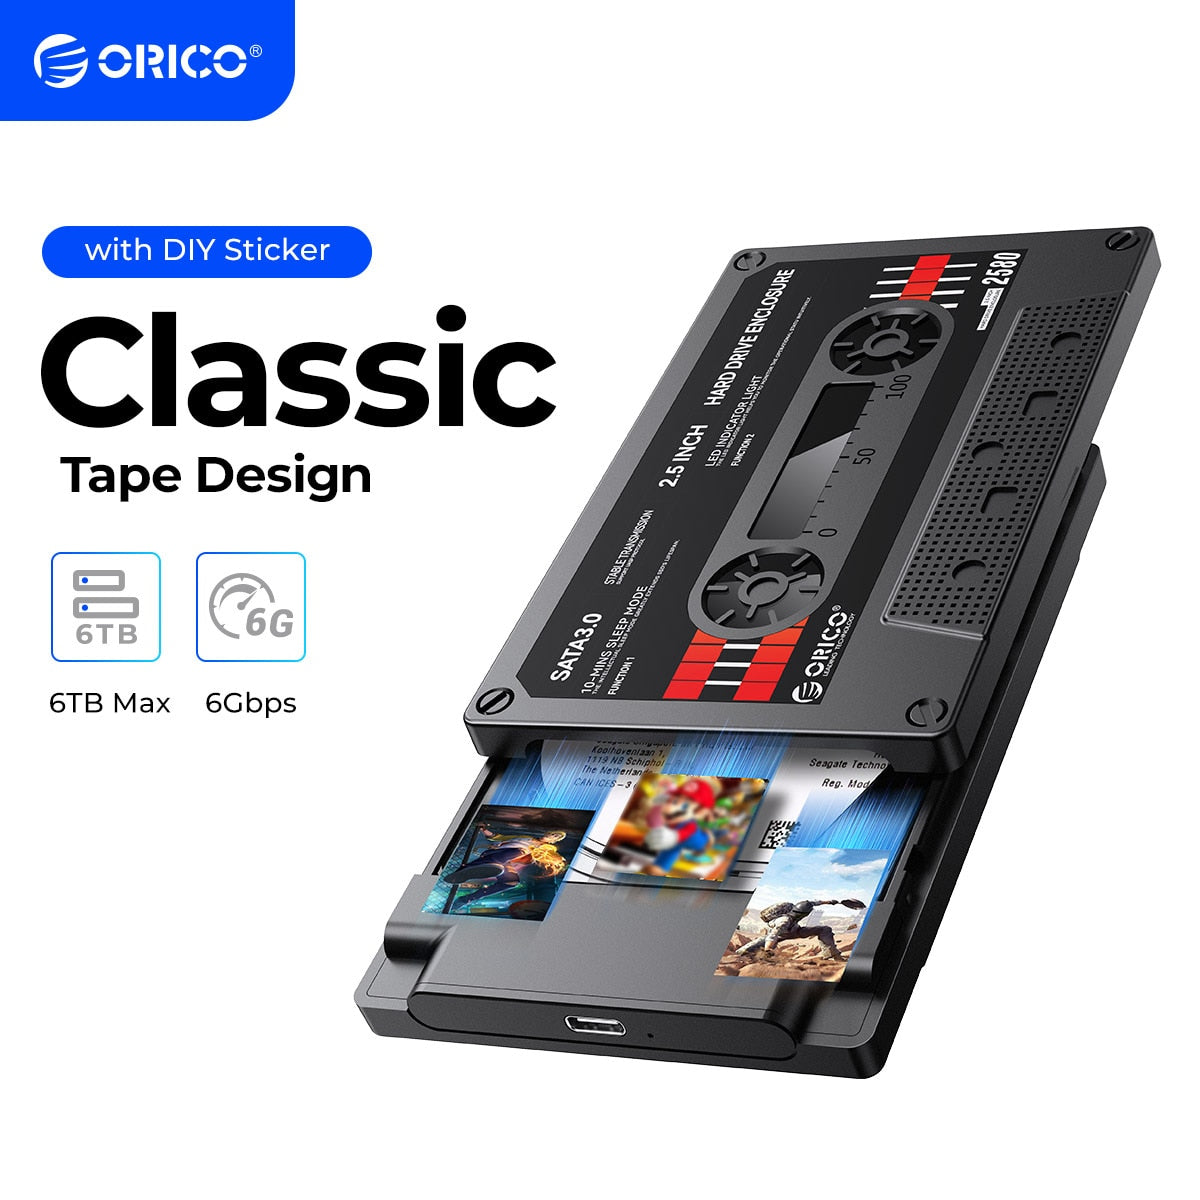 ORICO 2.5'' HDD Enclosure SATA to USB3.0 External Hard Drive Case 5Gbps / 6Gbps Type-C HDD Case With DIY Sticker